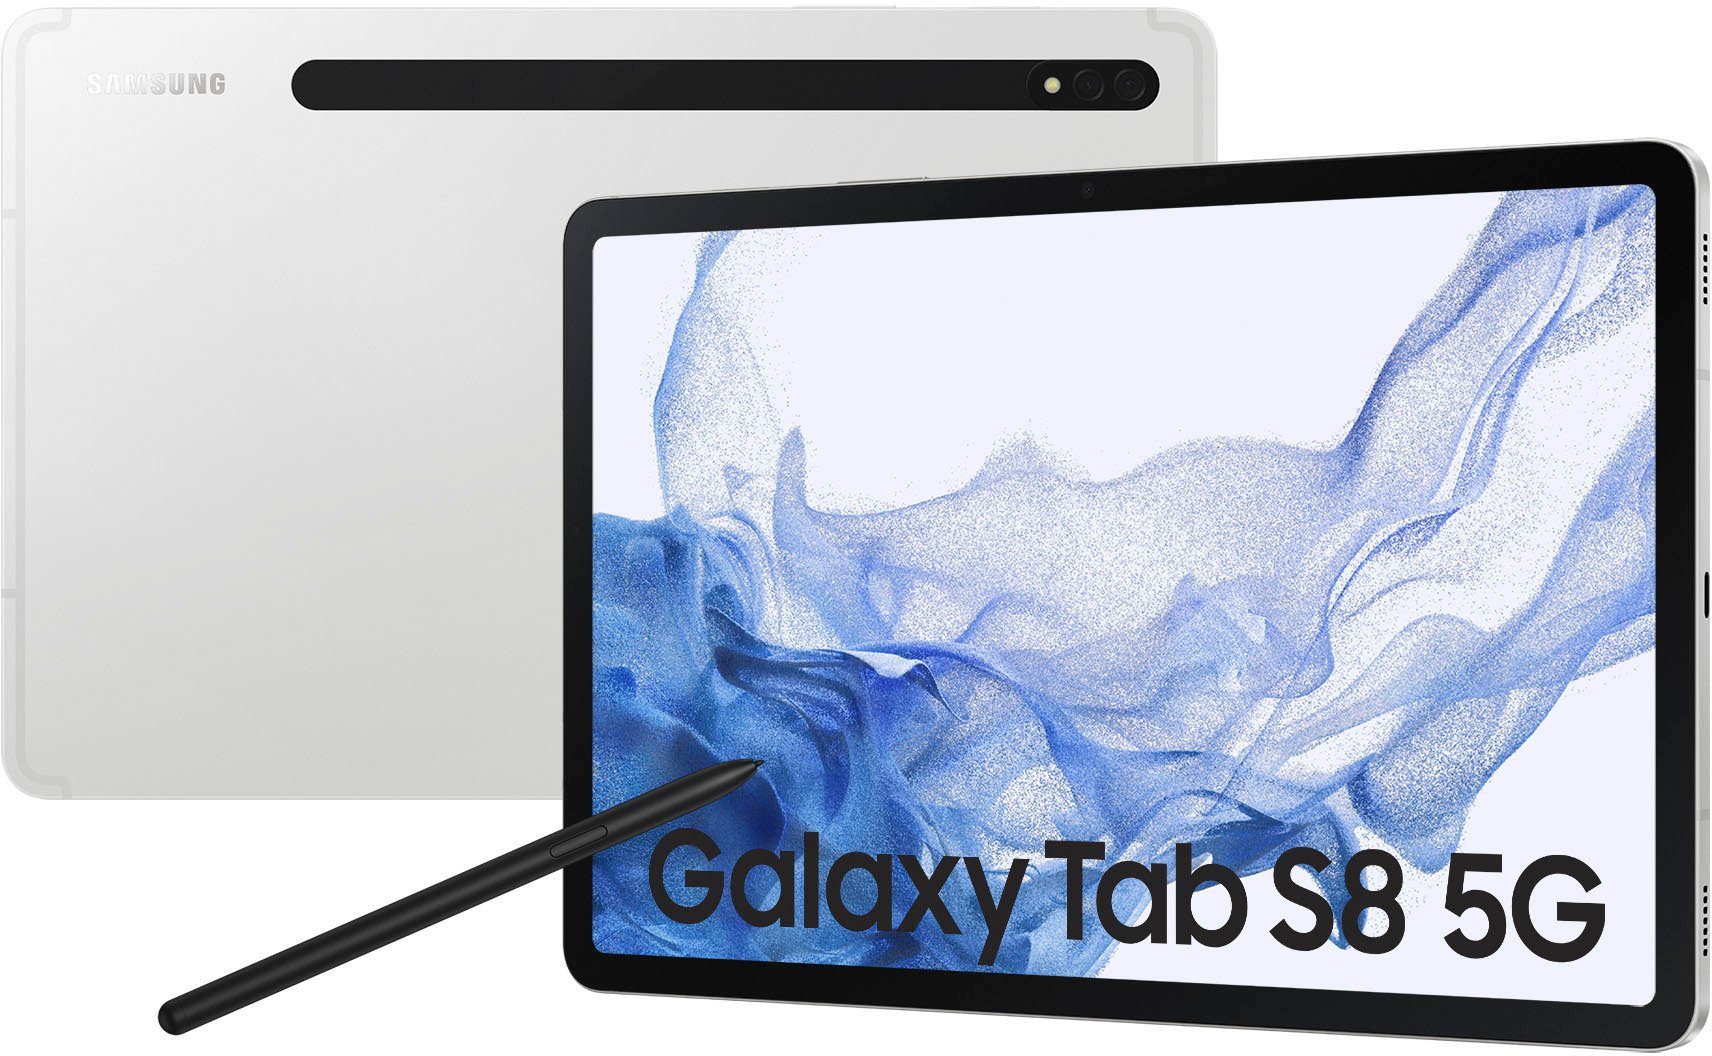 S8 Galaxy Tablet Samsung Silber GB, Android, Tab 5G) 5G (11", 128